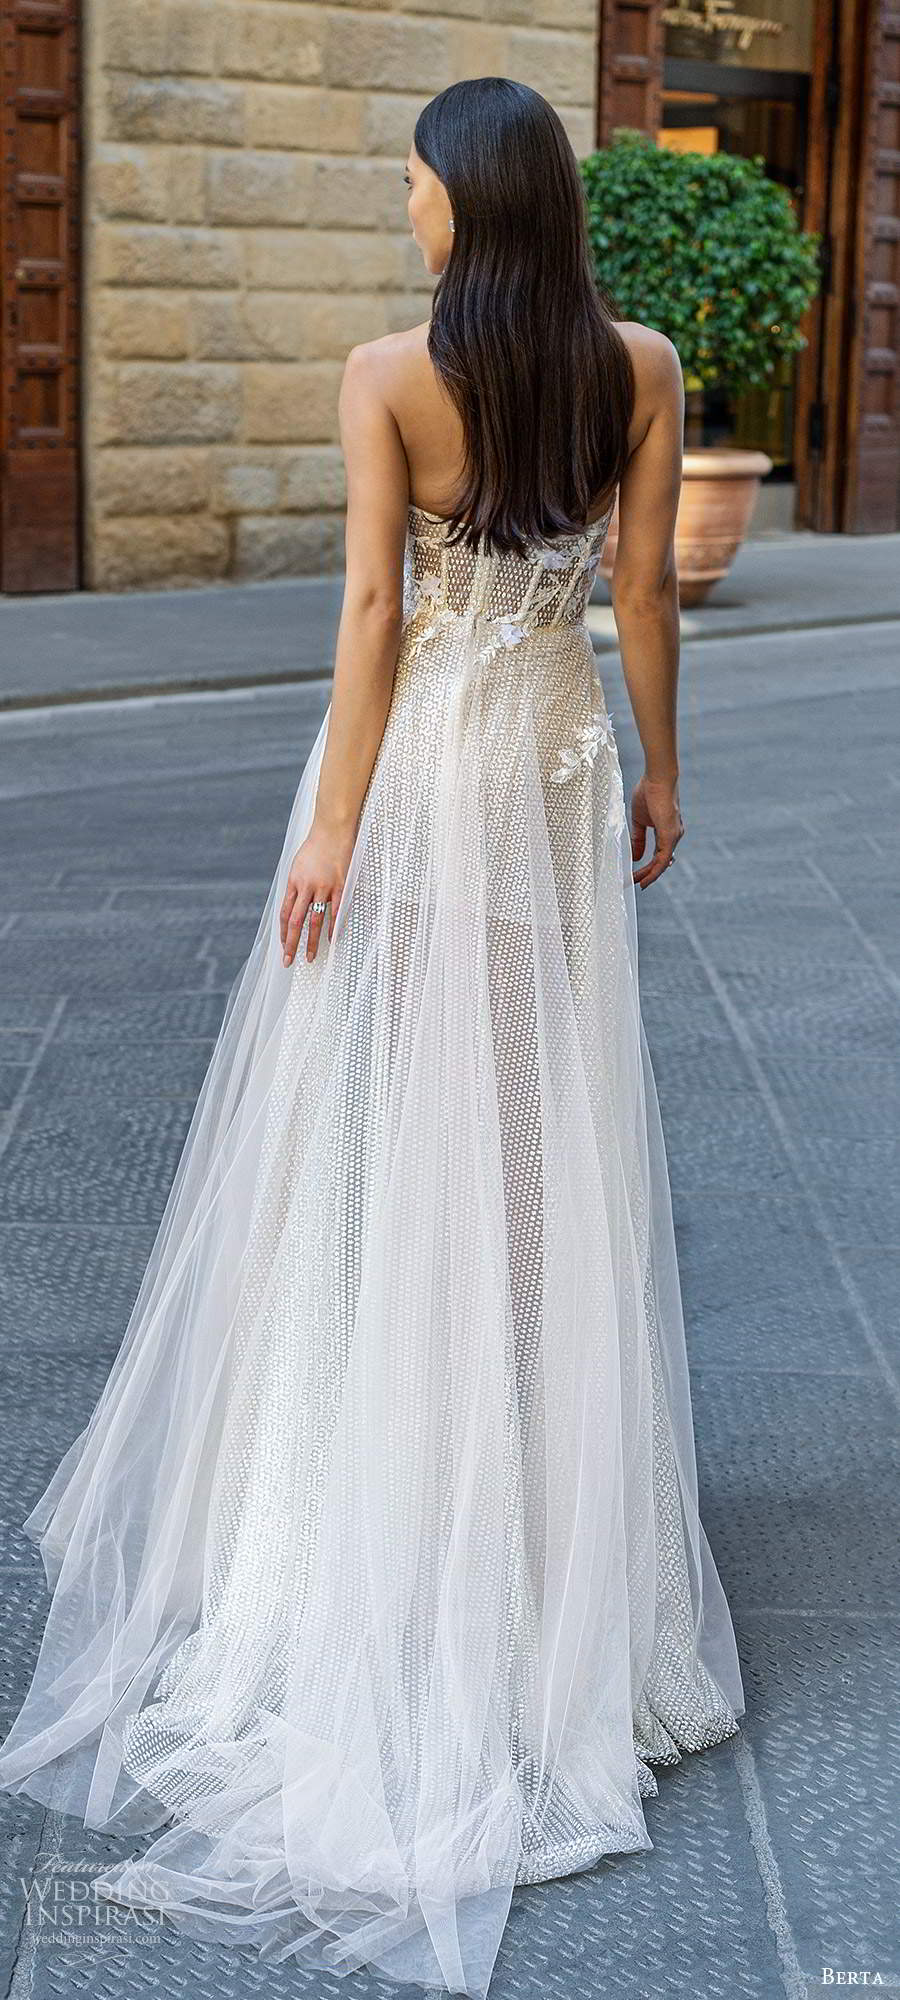 Muse by Berta Fall 2020 Wedding Dresses — “Florence” Bridal Collection ...